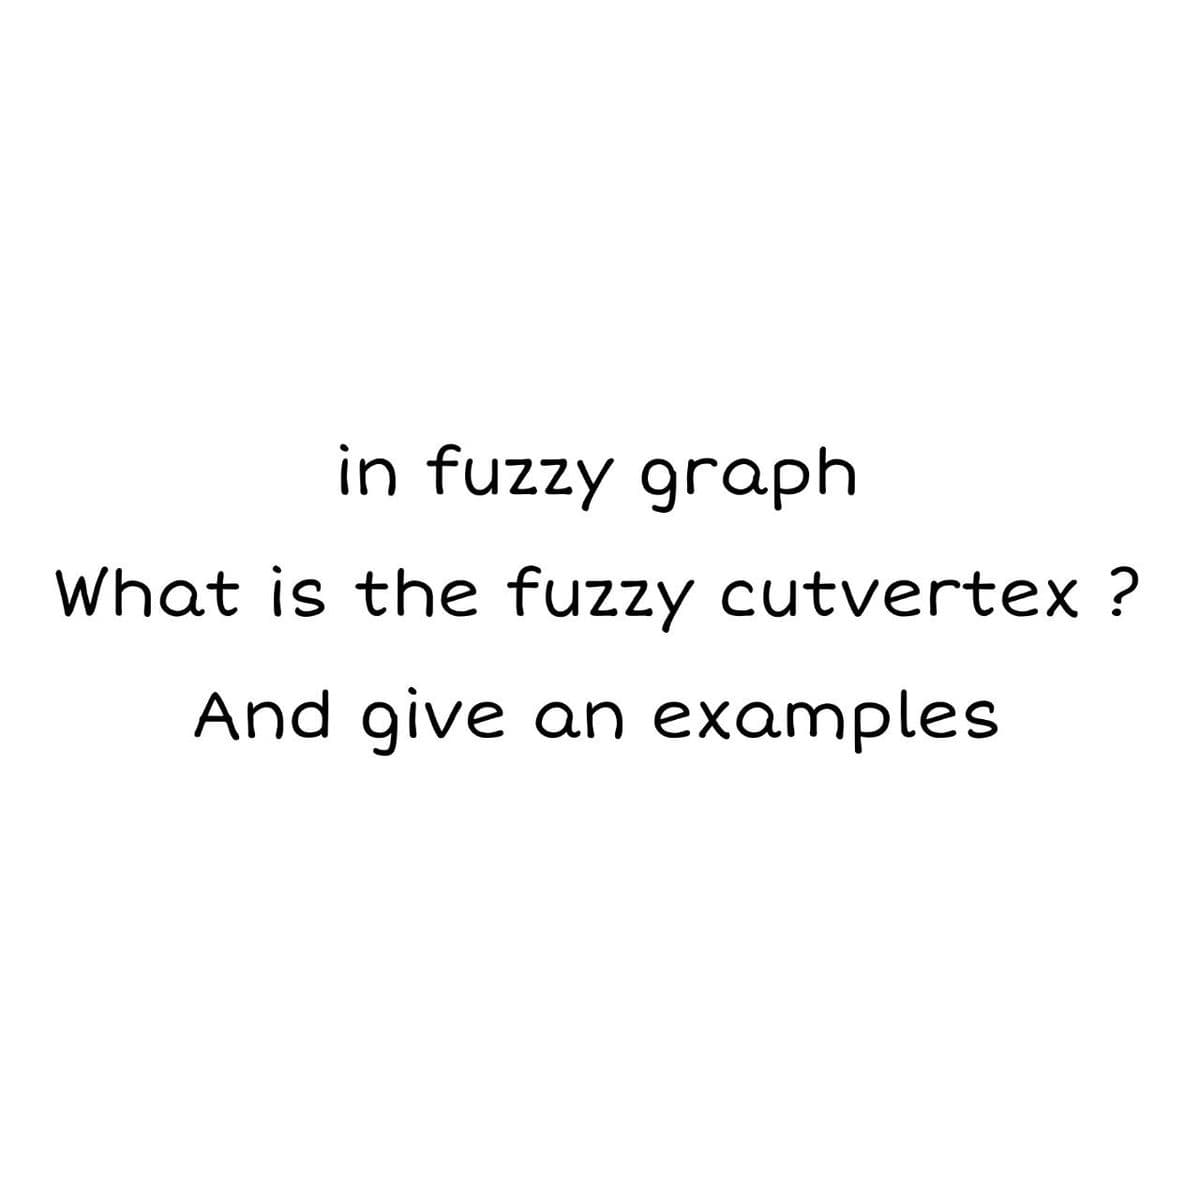 in fuzzy graph
What is the fuzzy cutvertex ?
And give an examples